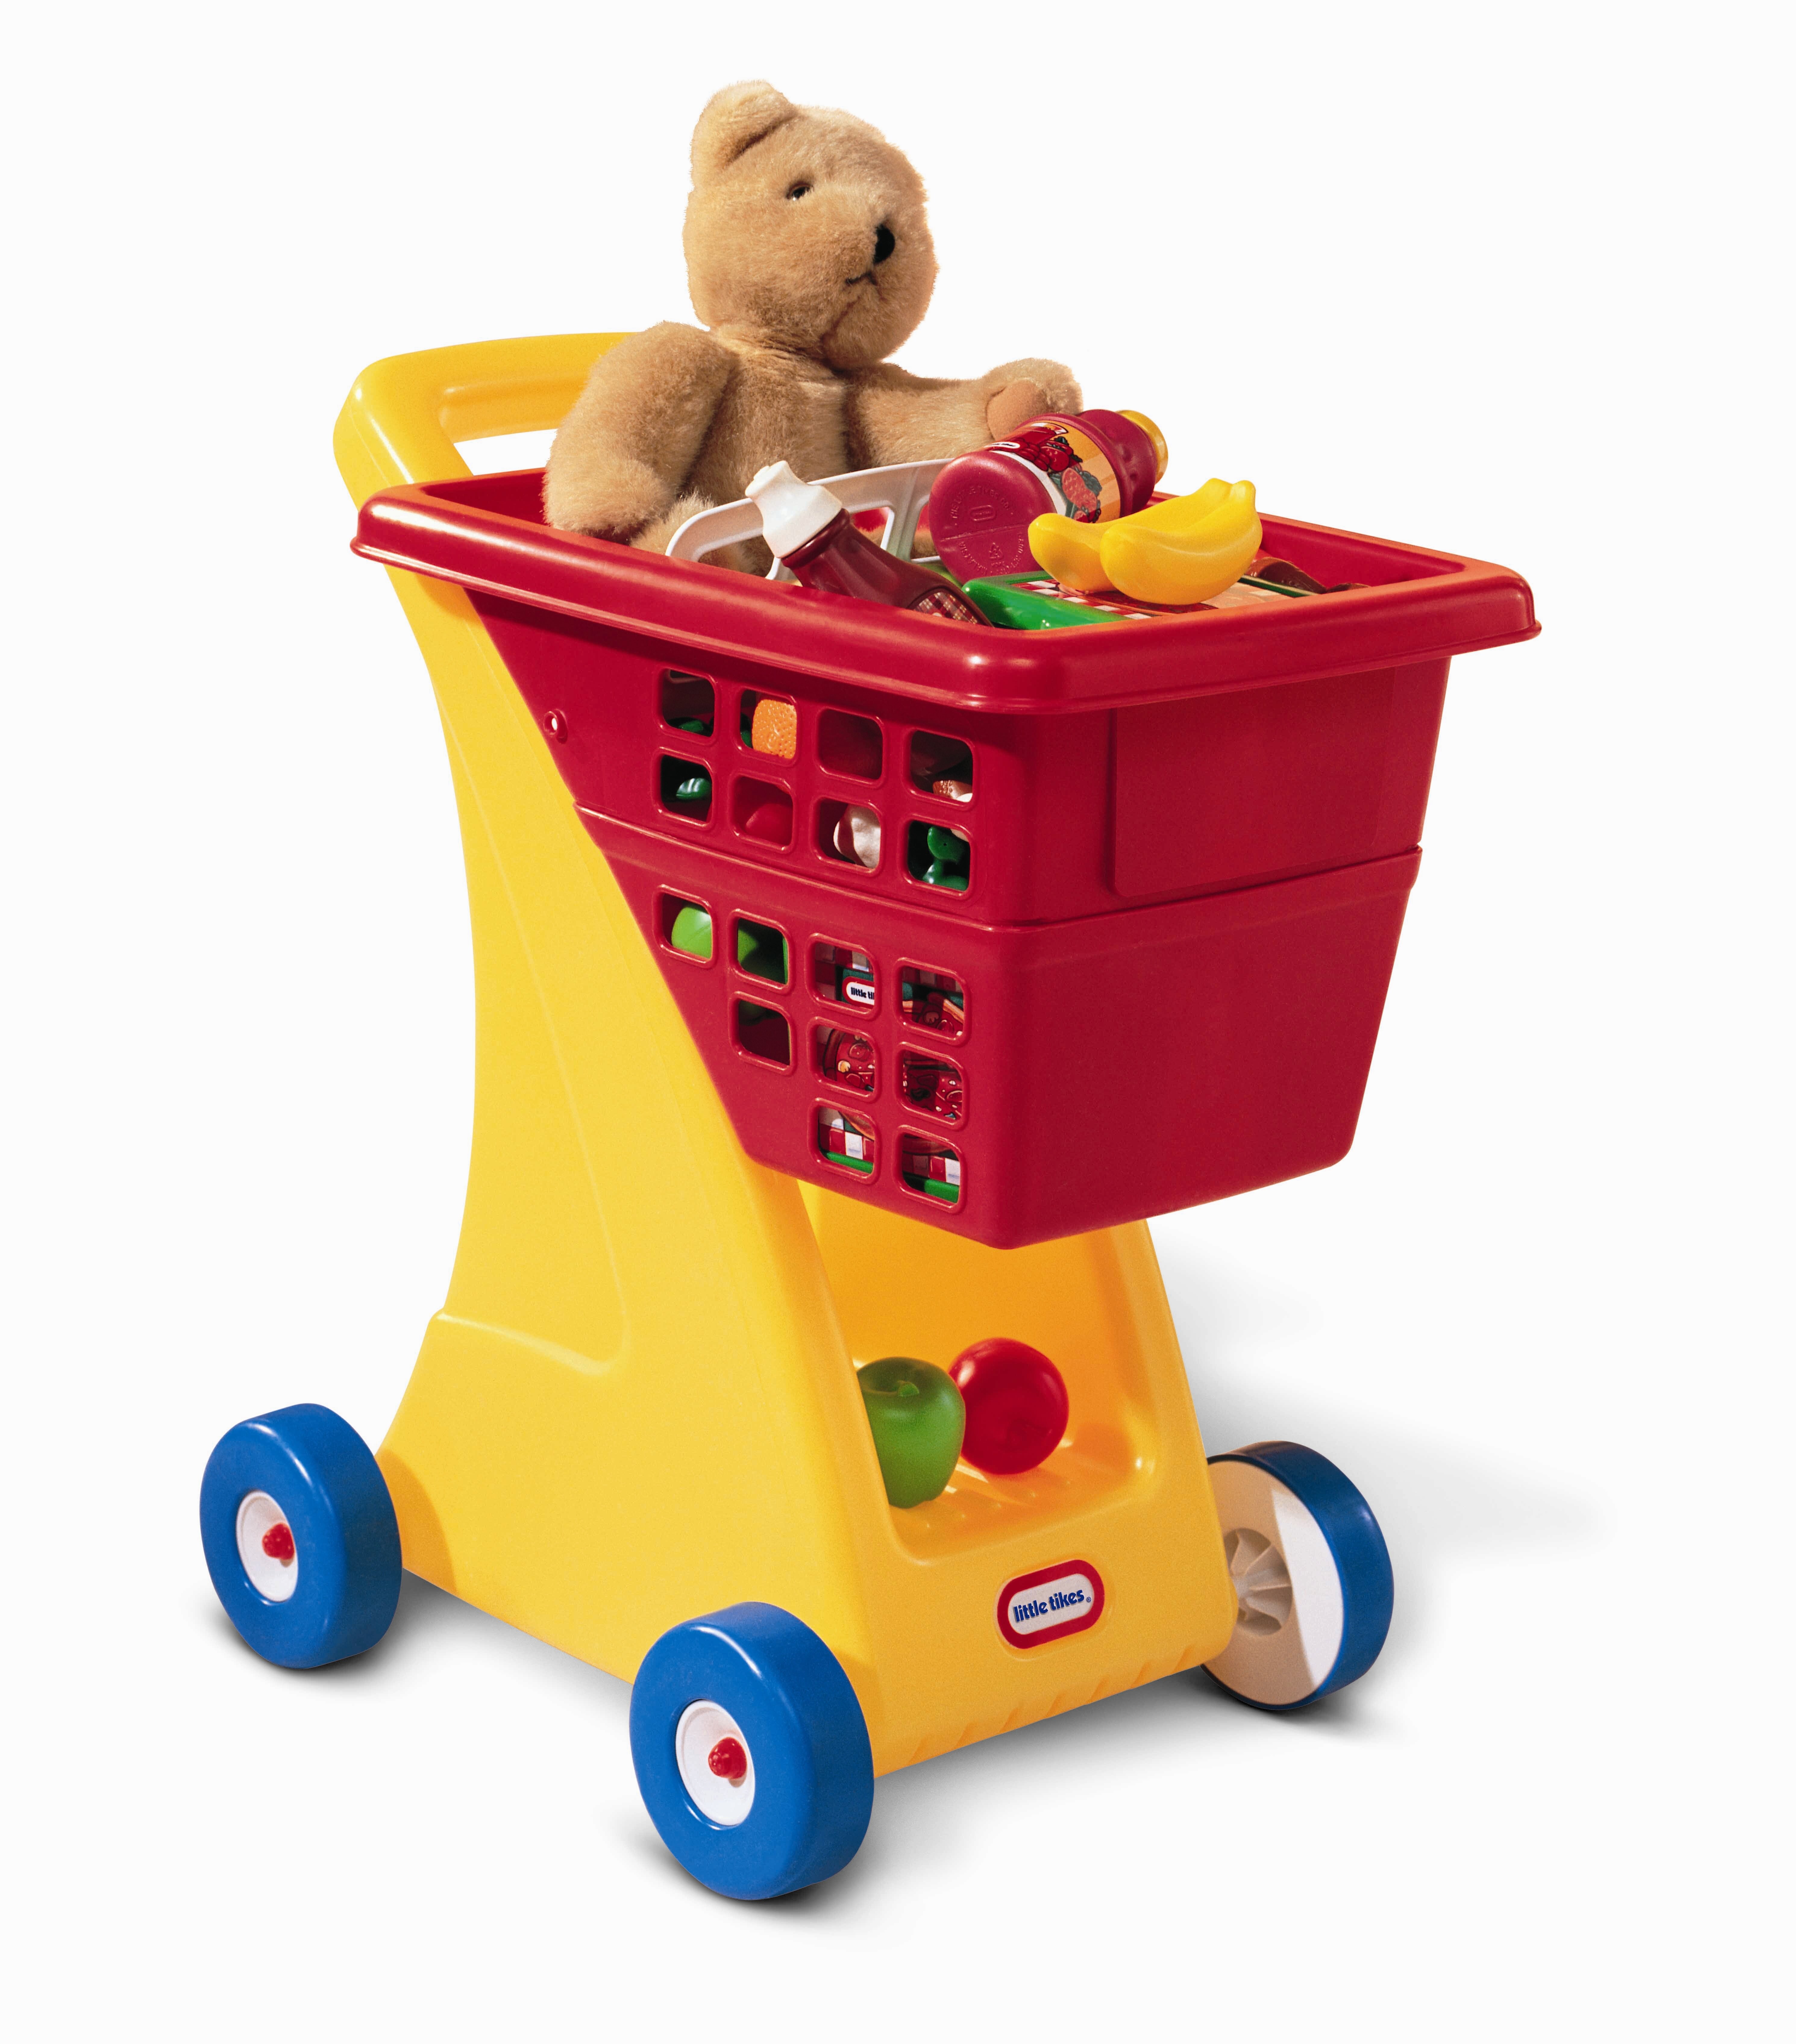 Melissa & Doug Bundle Includes 2 Items Toy Shopping Cart with